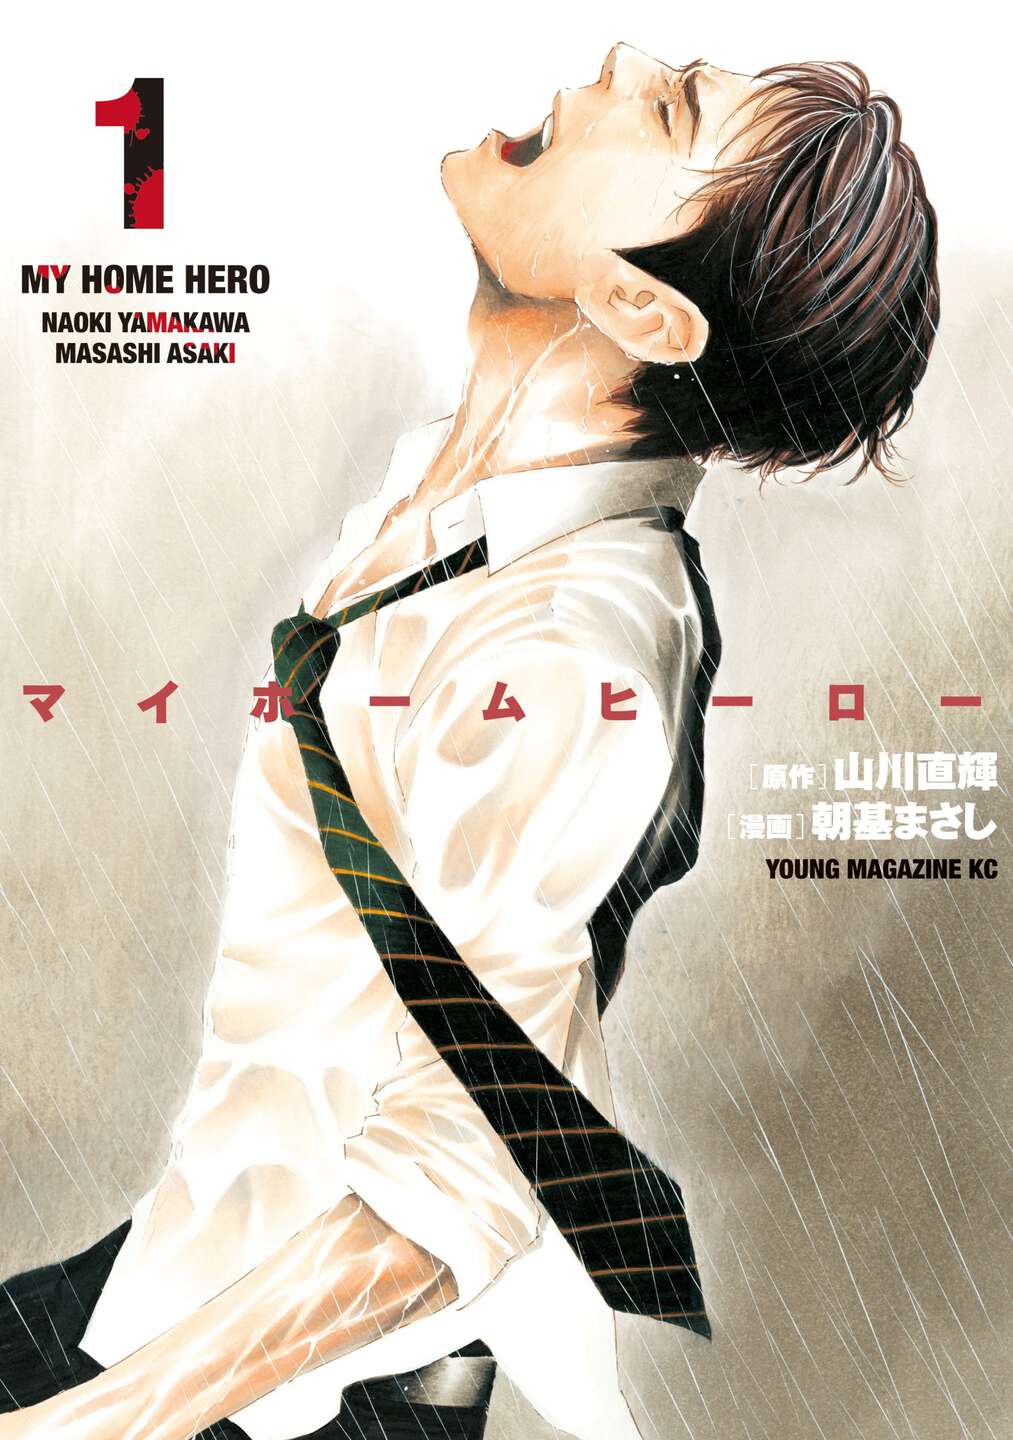 K MANGA on X: My Home Hero's new chapter has arrived! CHAPTER 199 LOVED  ONE Check it out👉 Read #MyHomeHero Chs. 1-39 for  free at K MANGA The series is getting adapted